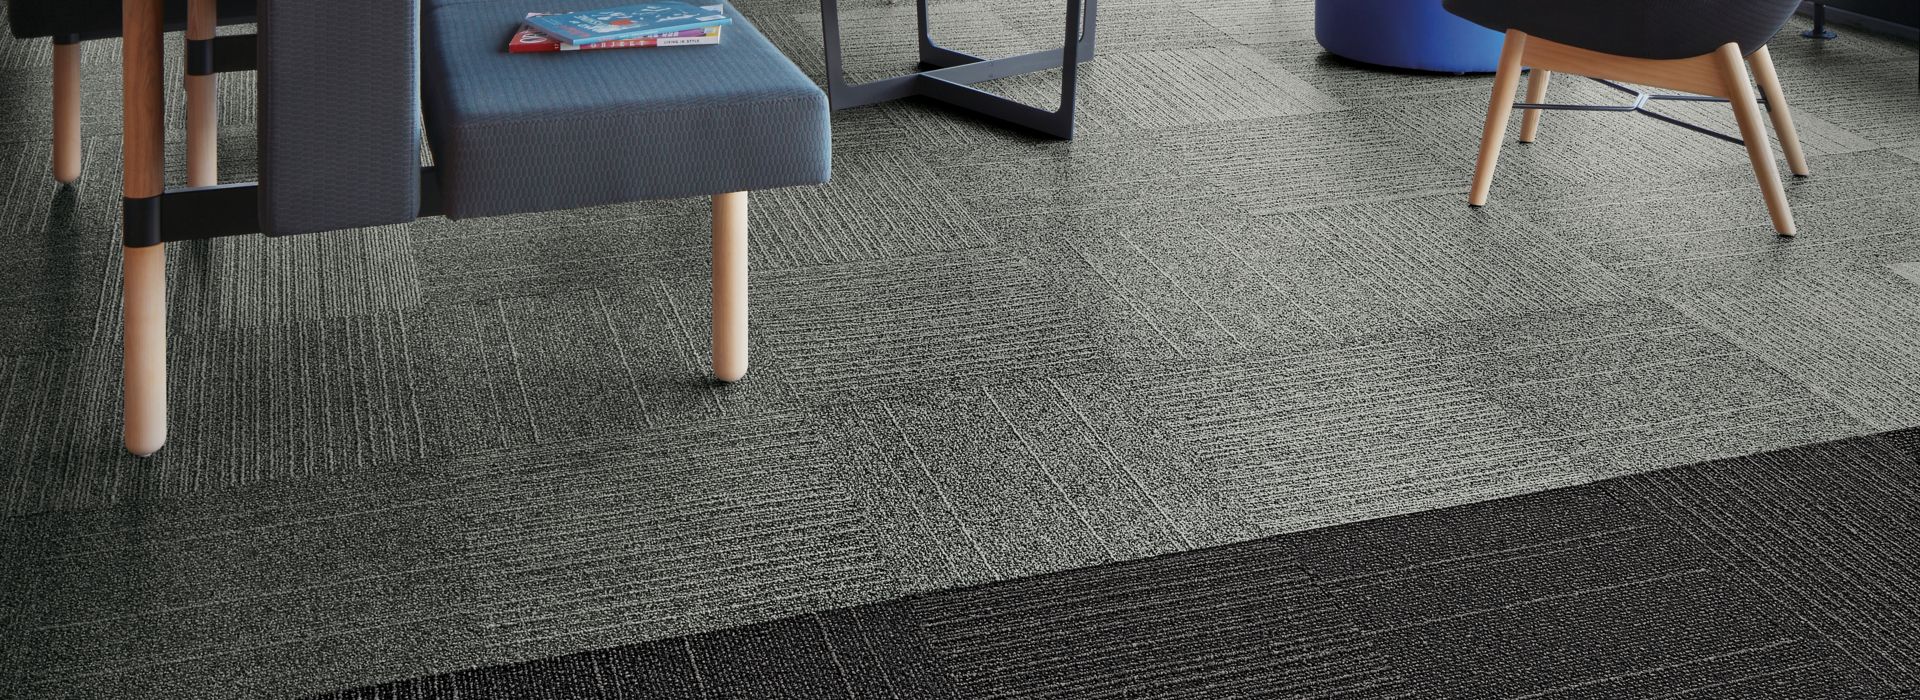 Interface Open Air 423 carpet tile in social space with blue seating and floor to ceiling windows numéro d’image 1